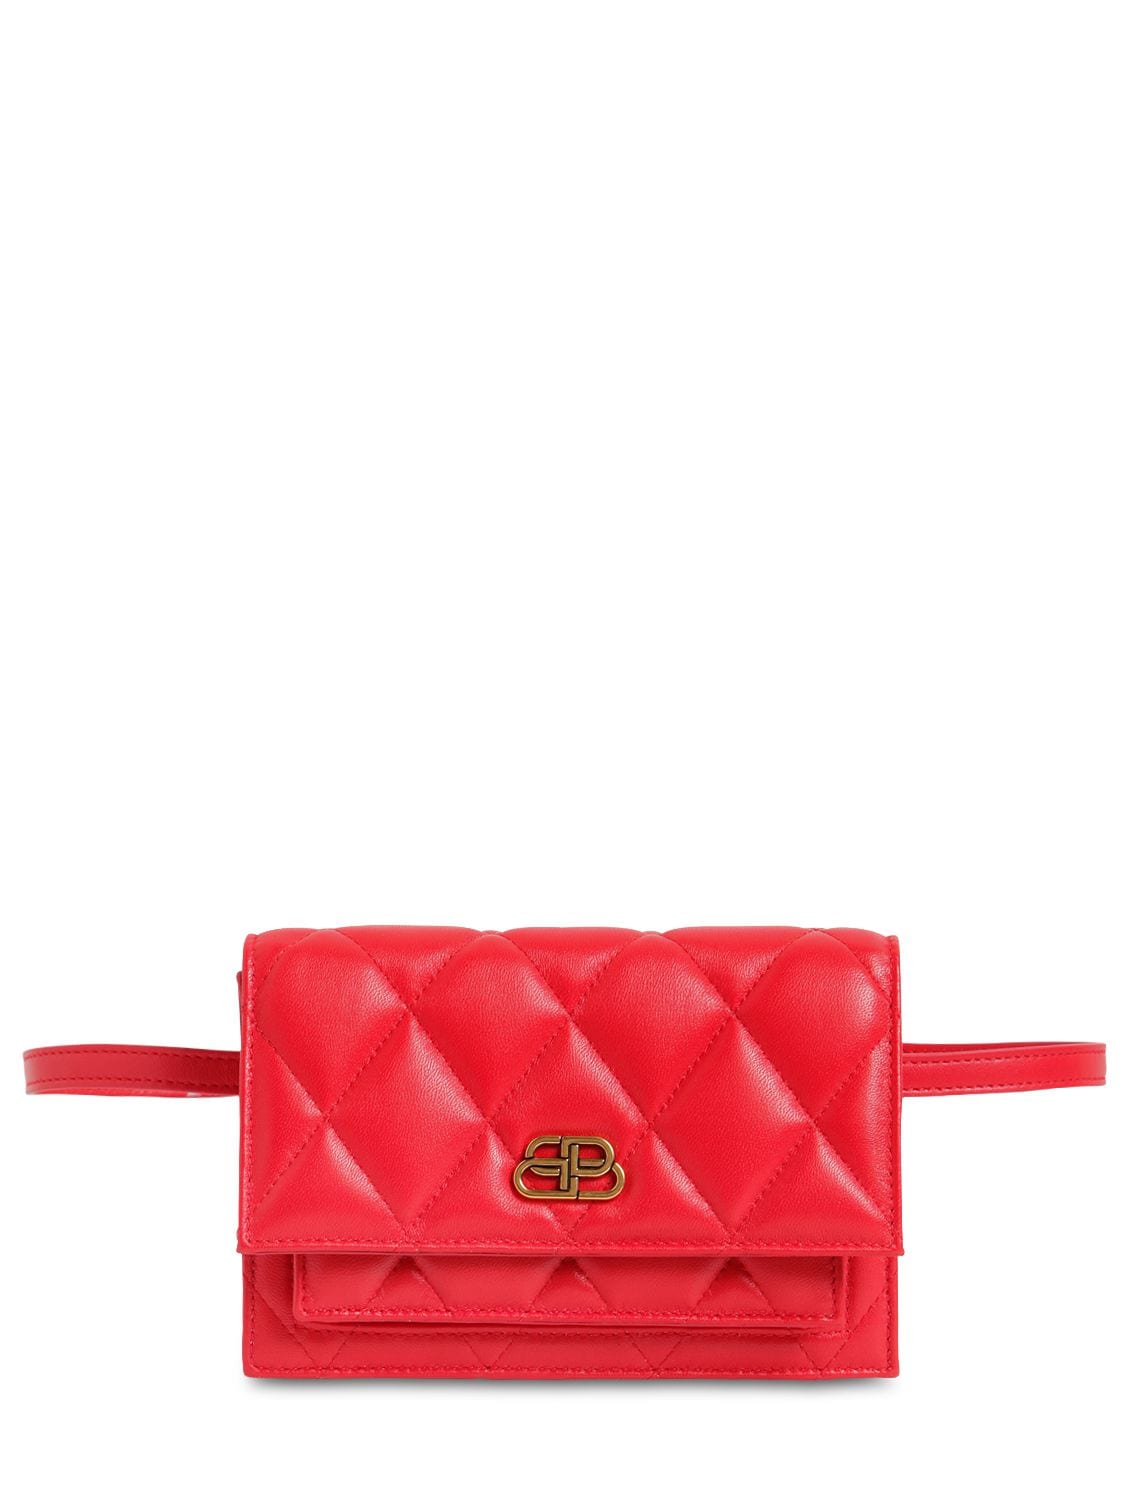 Balenciaga Xs Sharp Quilted Leather Belt Bag In Bright Red | ModeSens